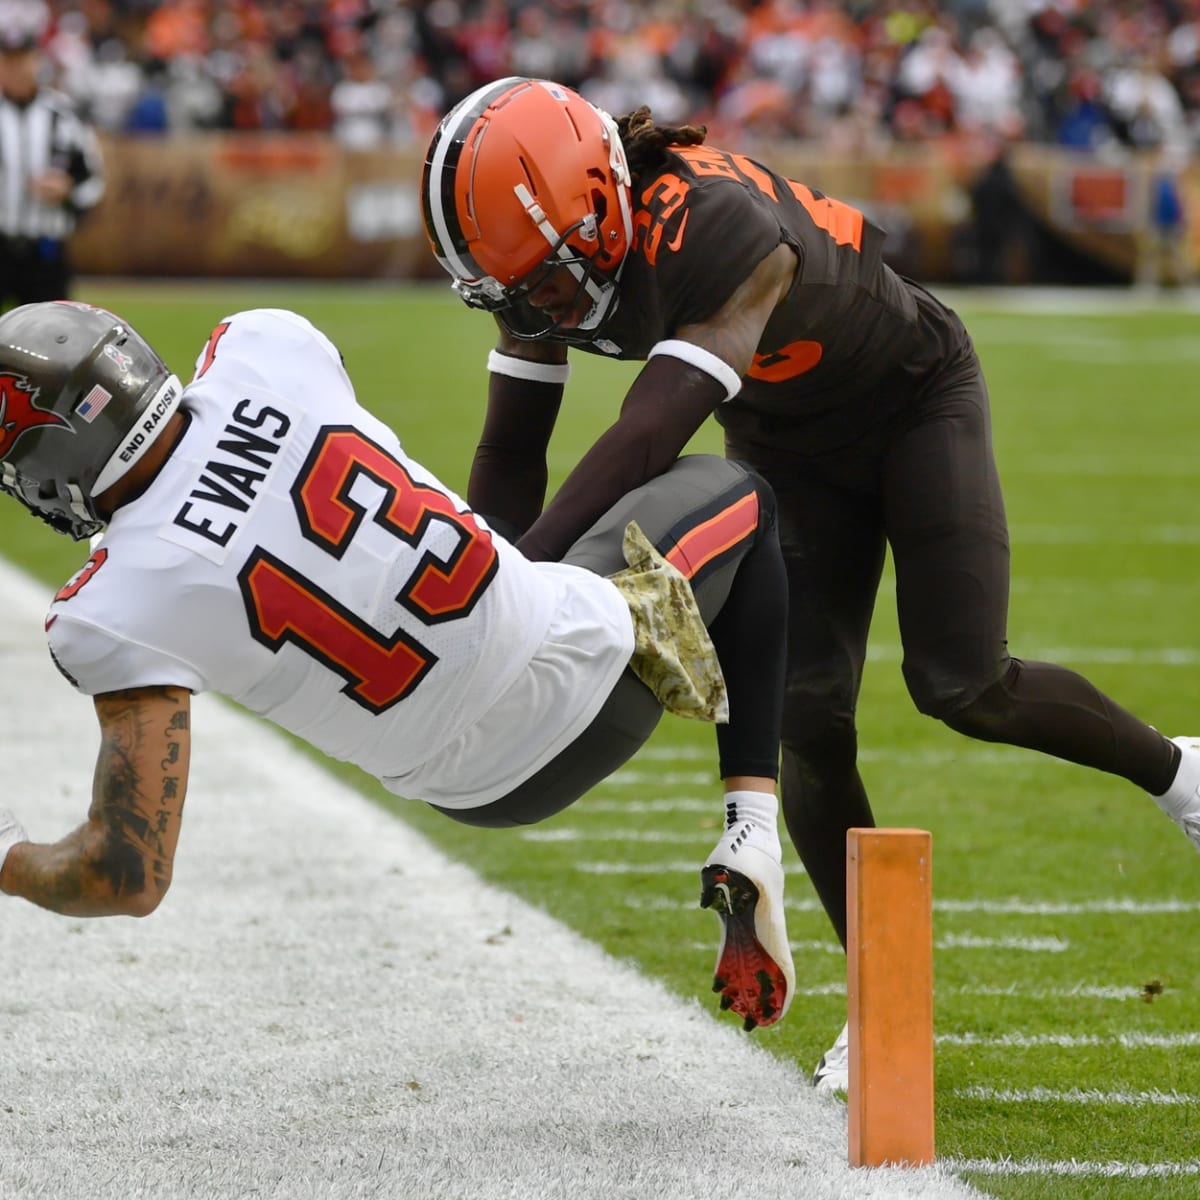 How Bucs receiver Mike Evans went from questionable to remarkable